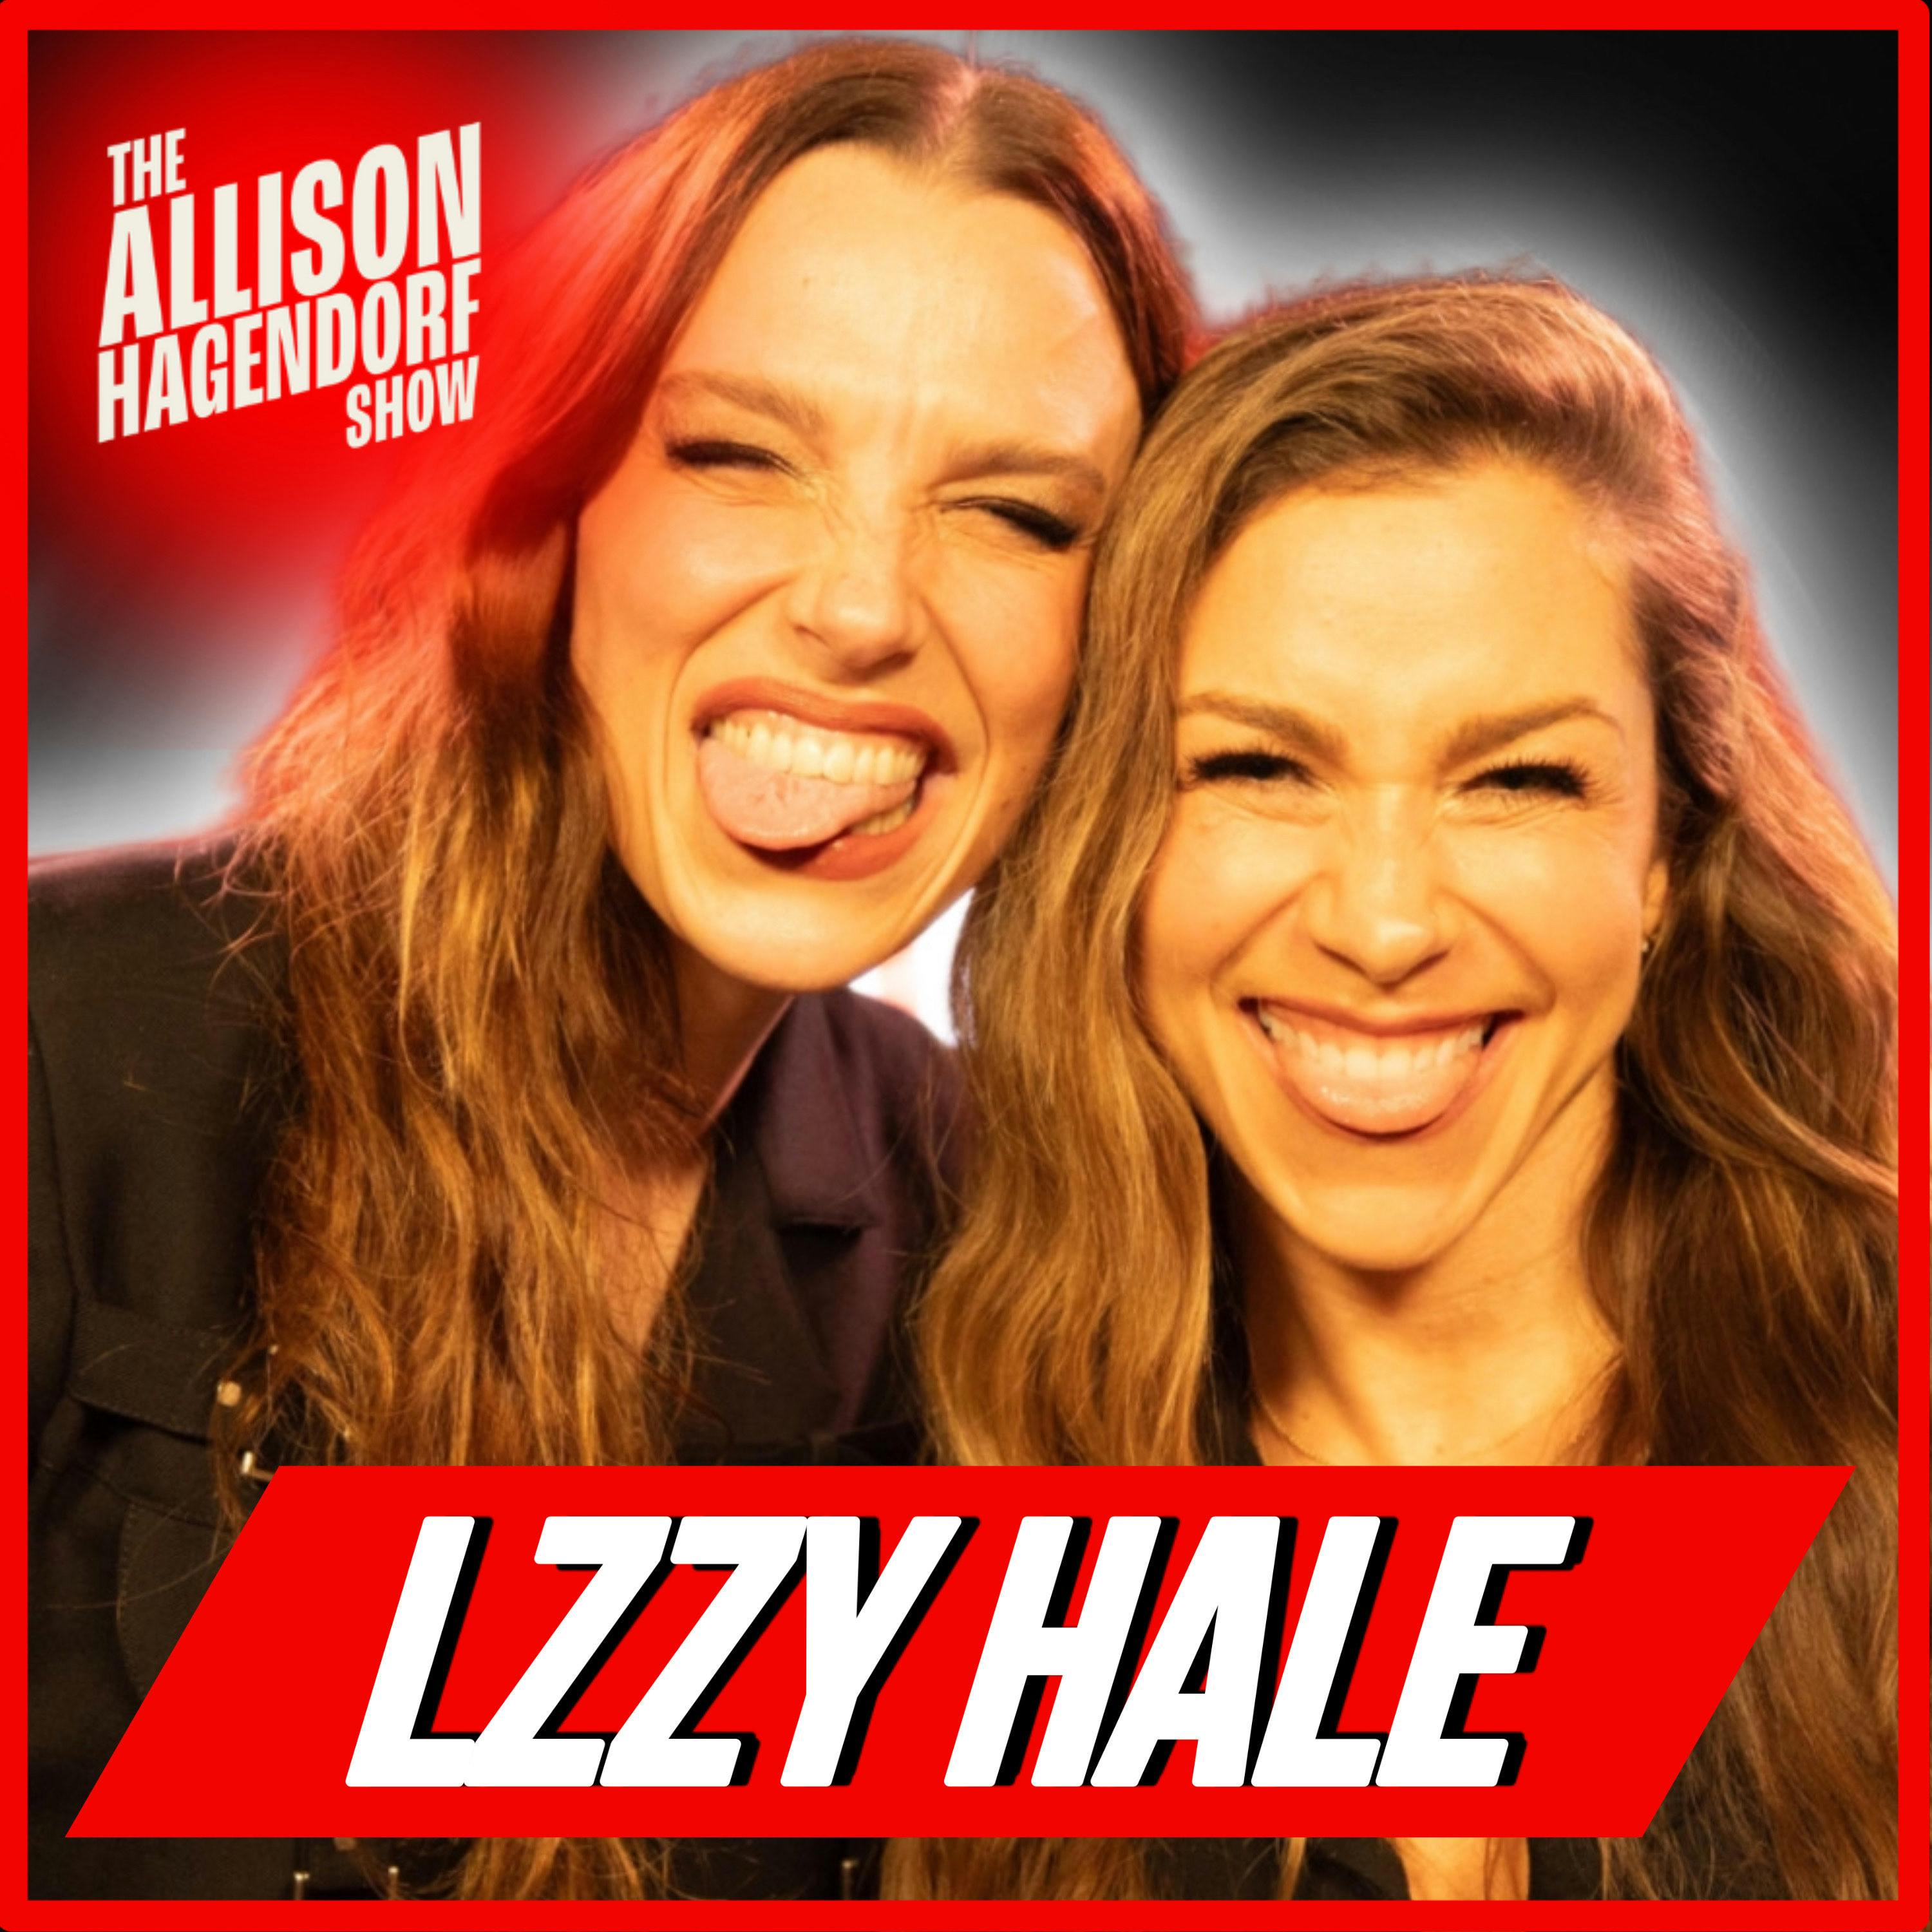 Halestorm’s Lzzy Hale shares her secret to being manically happy